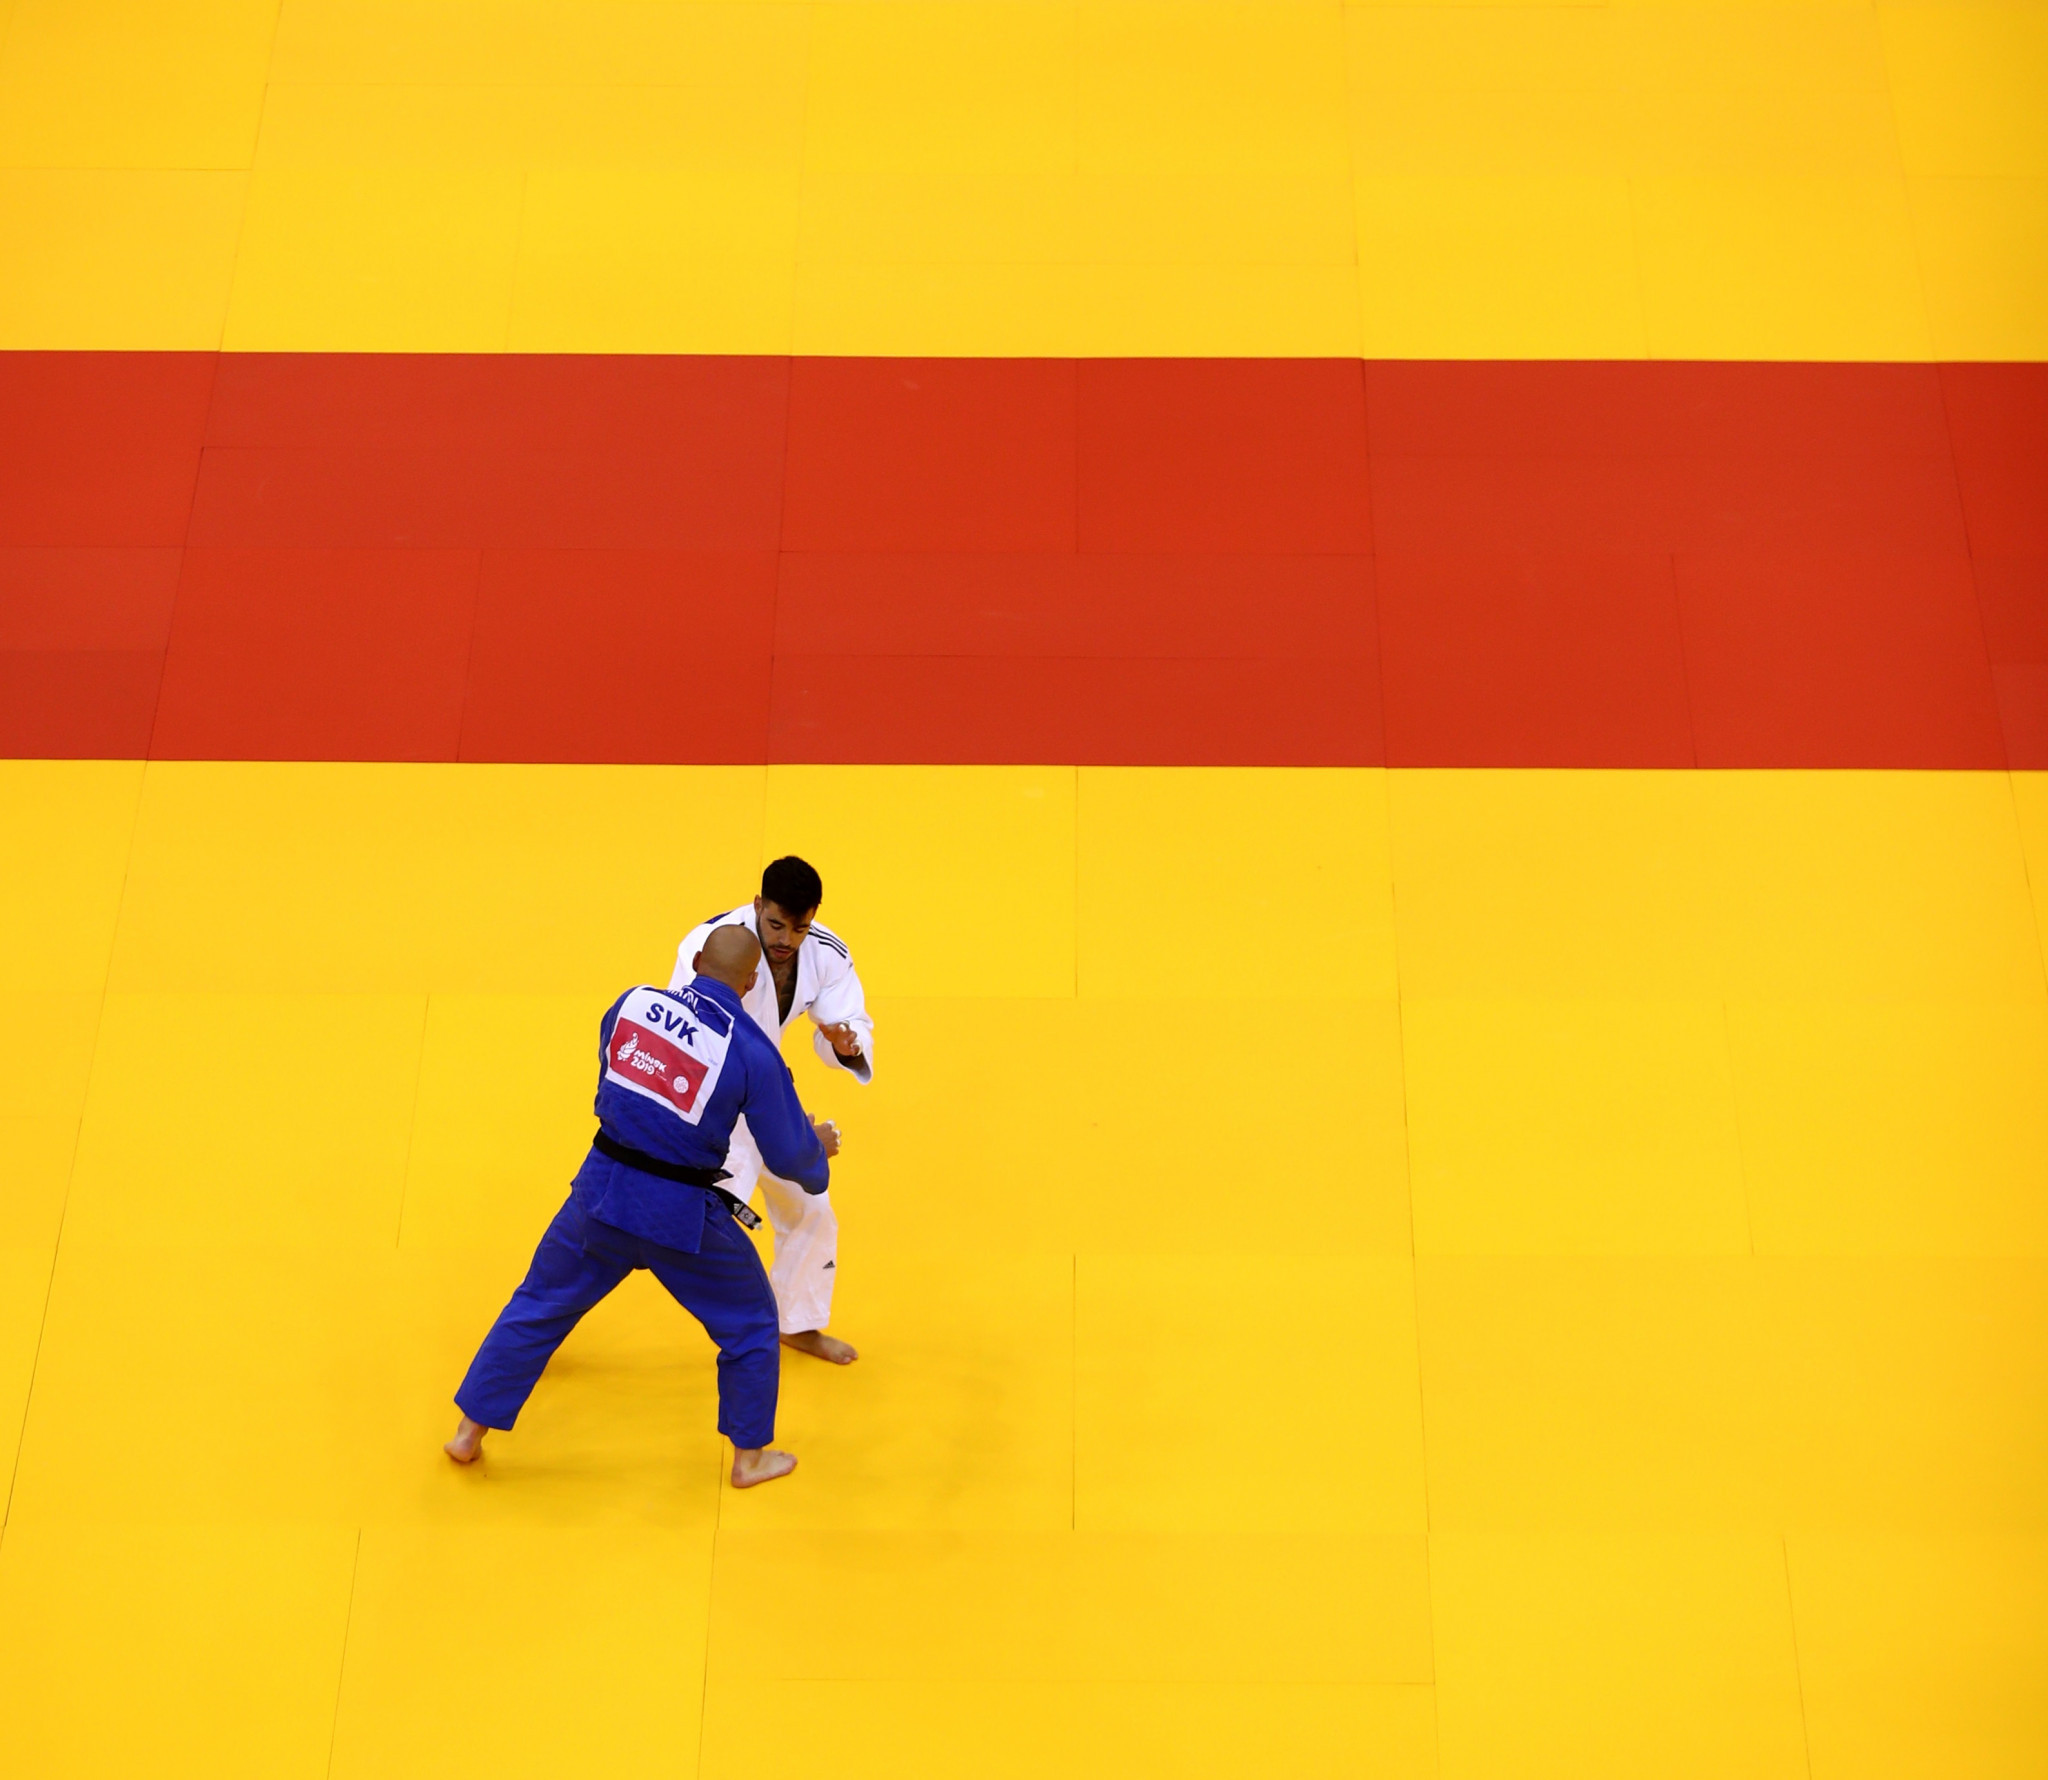 There are hopes to improve judo ties between Europe and Africa ©Getty Images